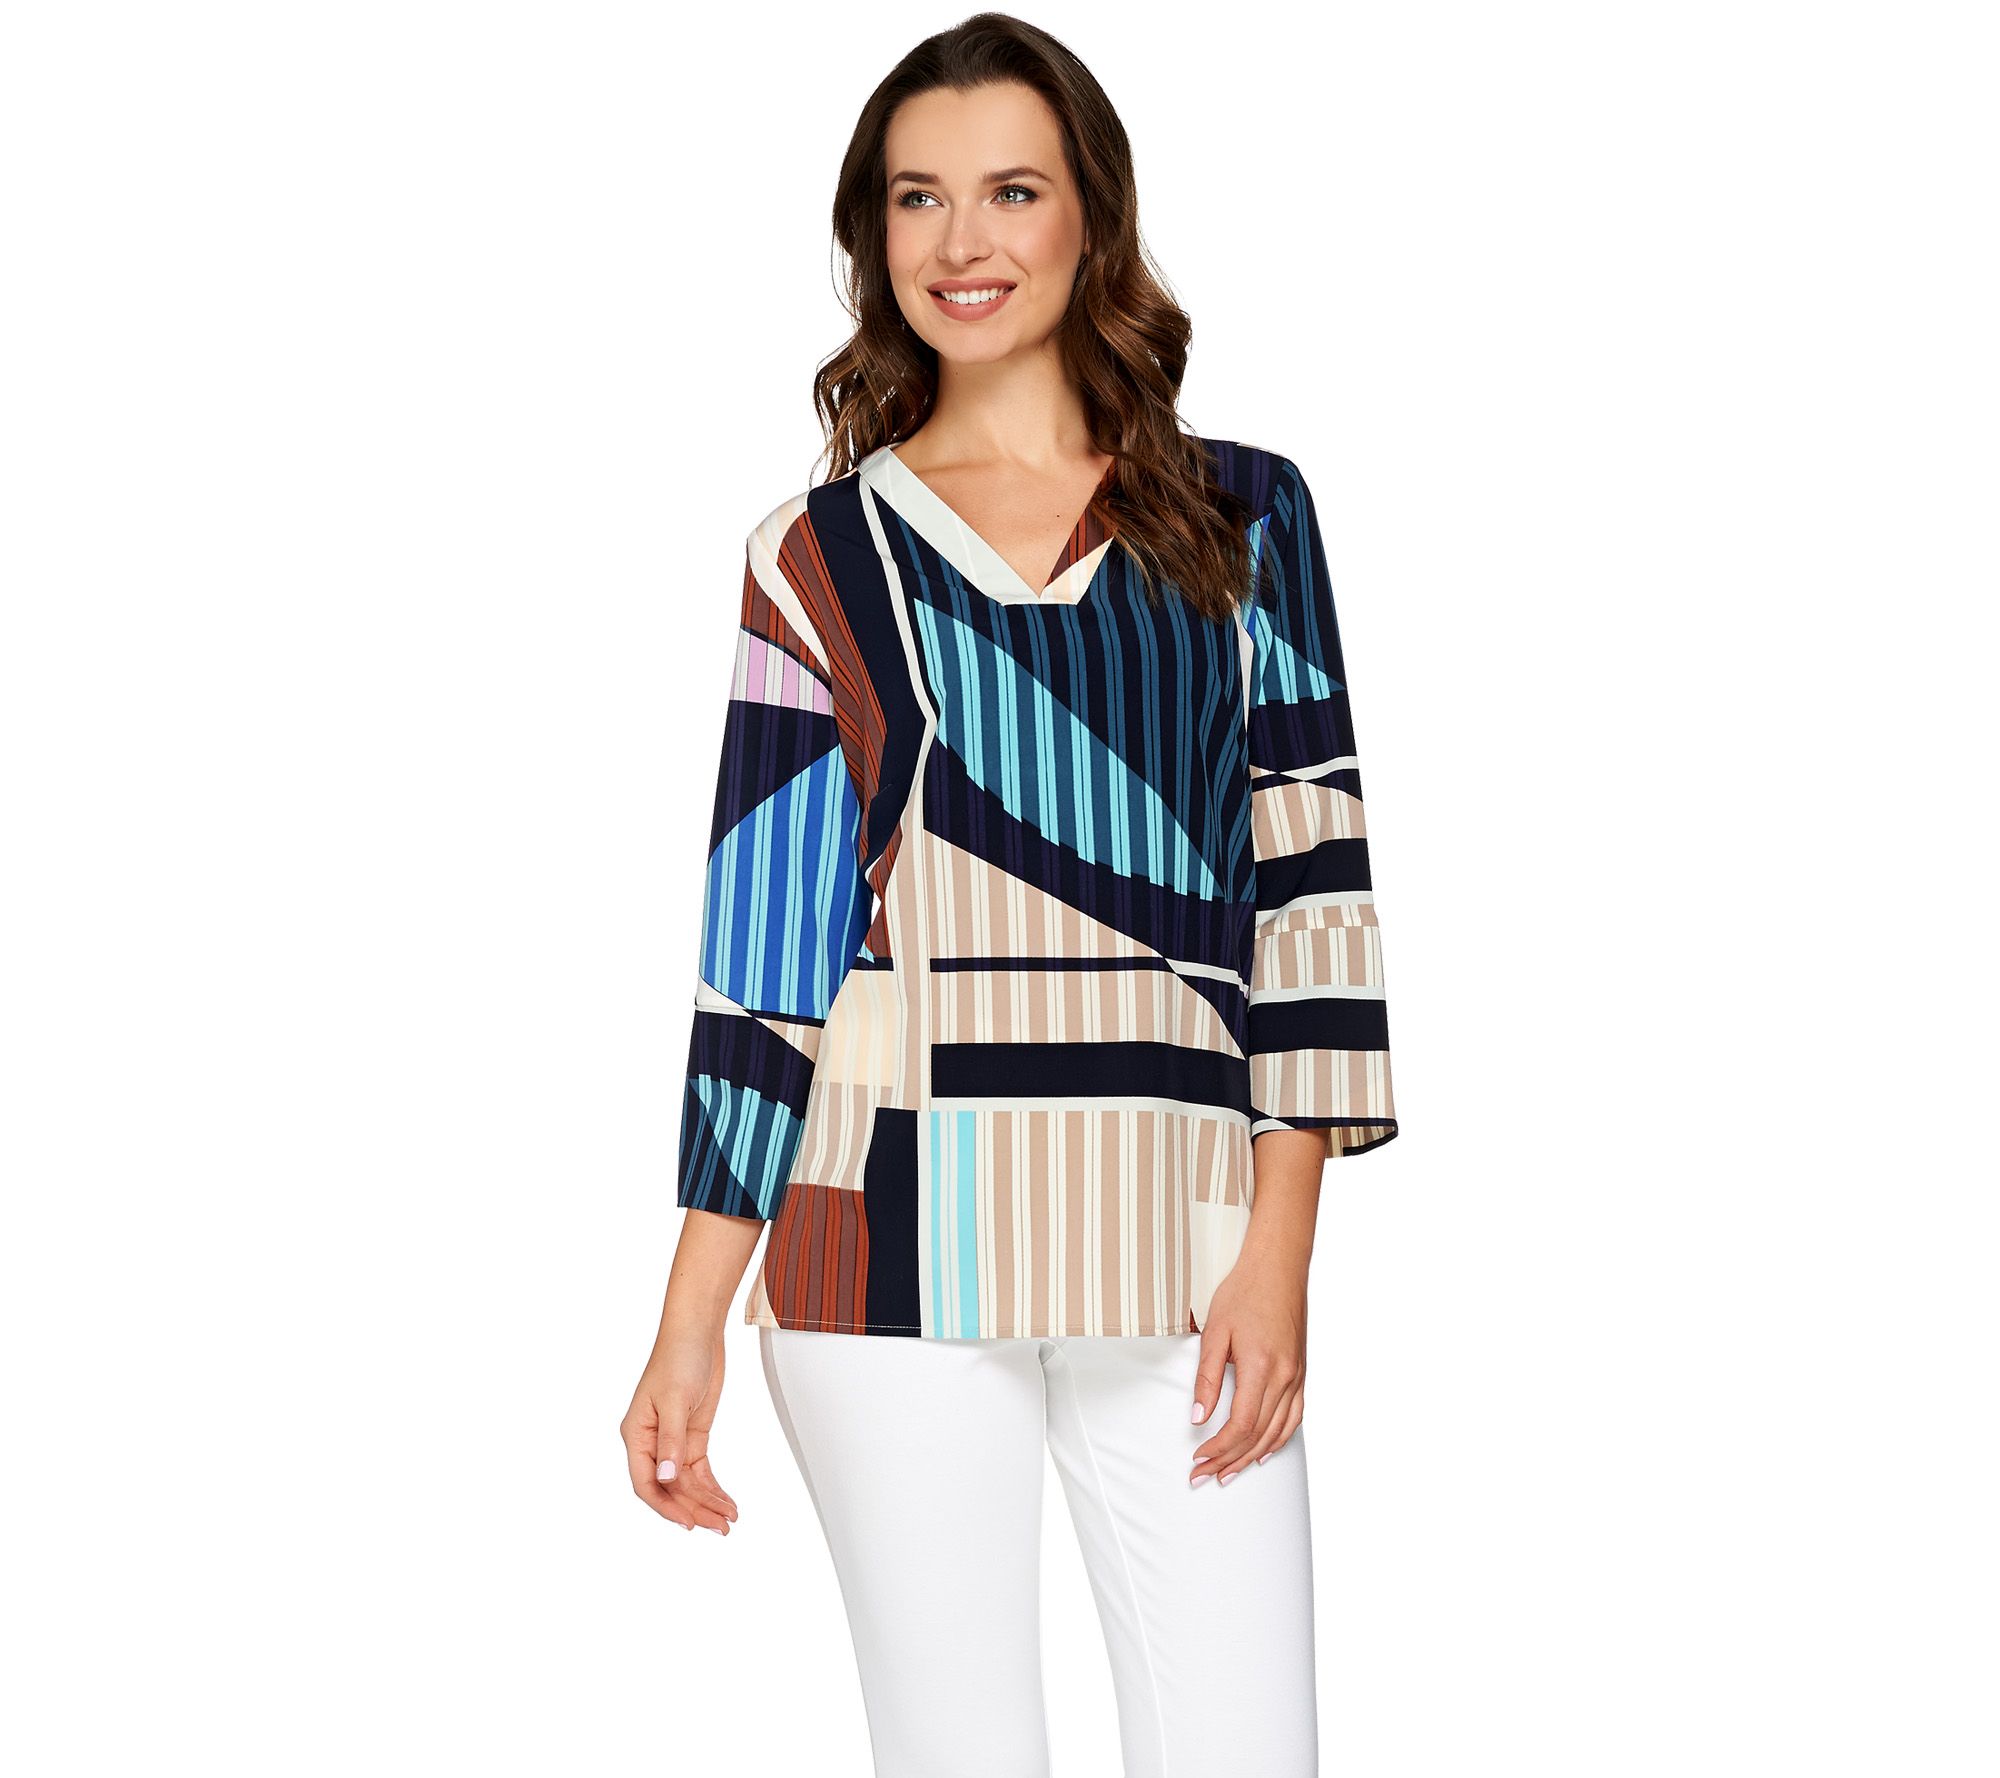 Kelly by Clinton Kelly Relaxed V-Neck Blouse - QVC.com